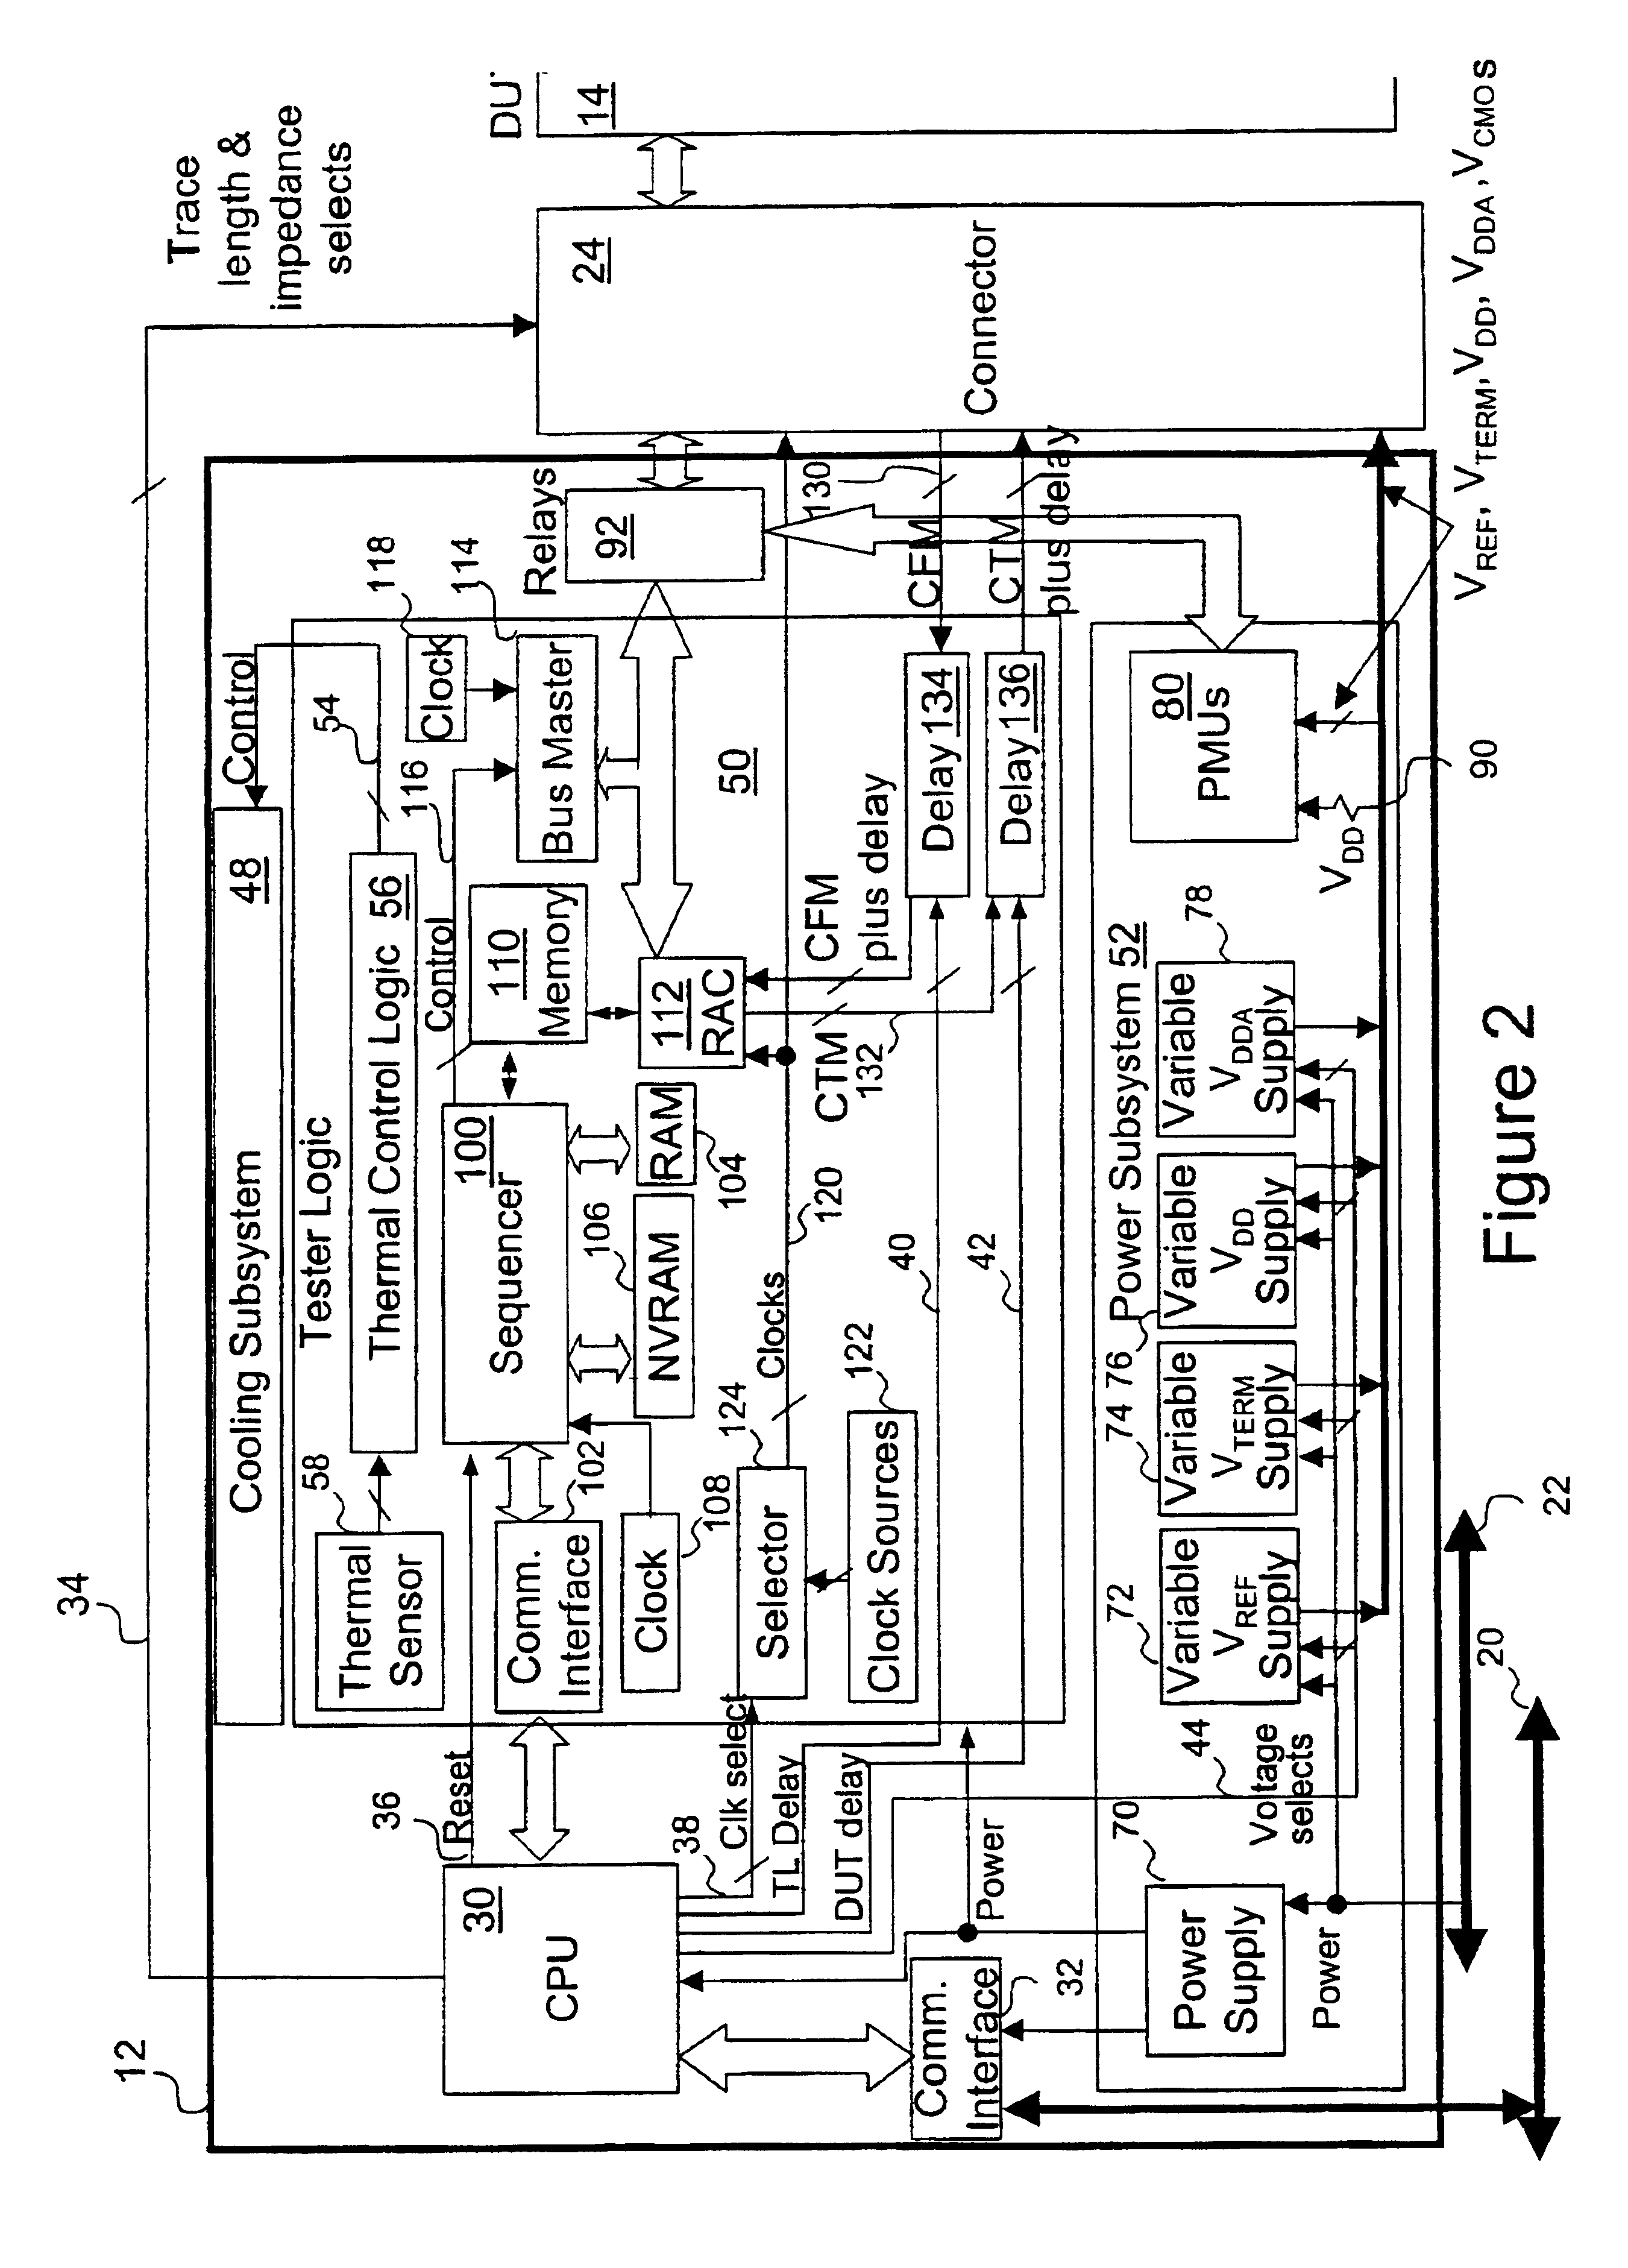 Method and system for wafer and device-level testing of an integrated circuit